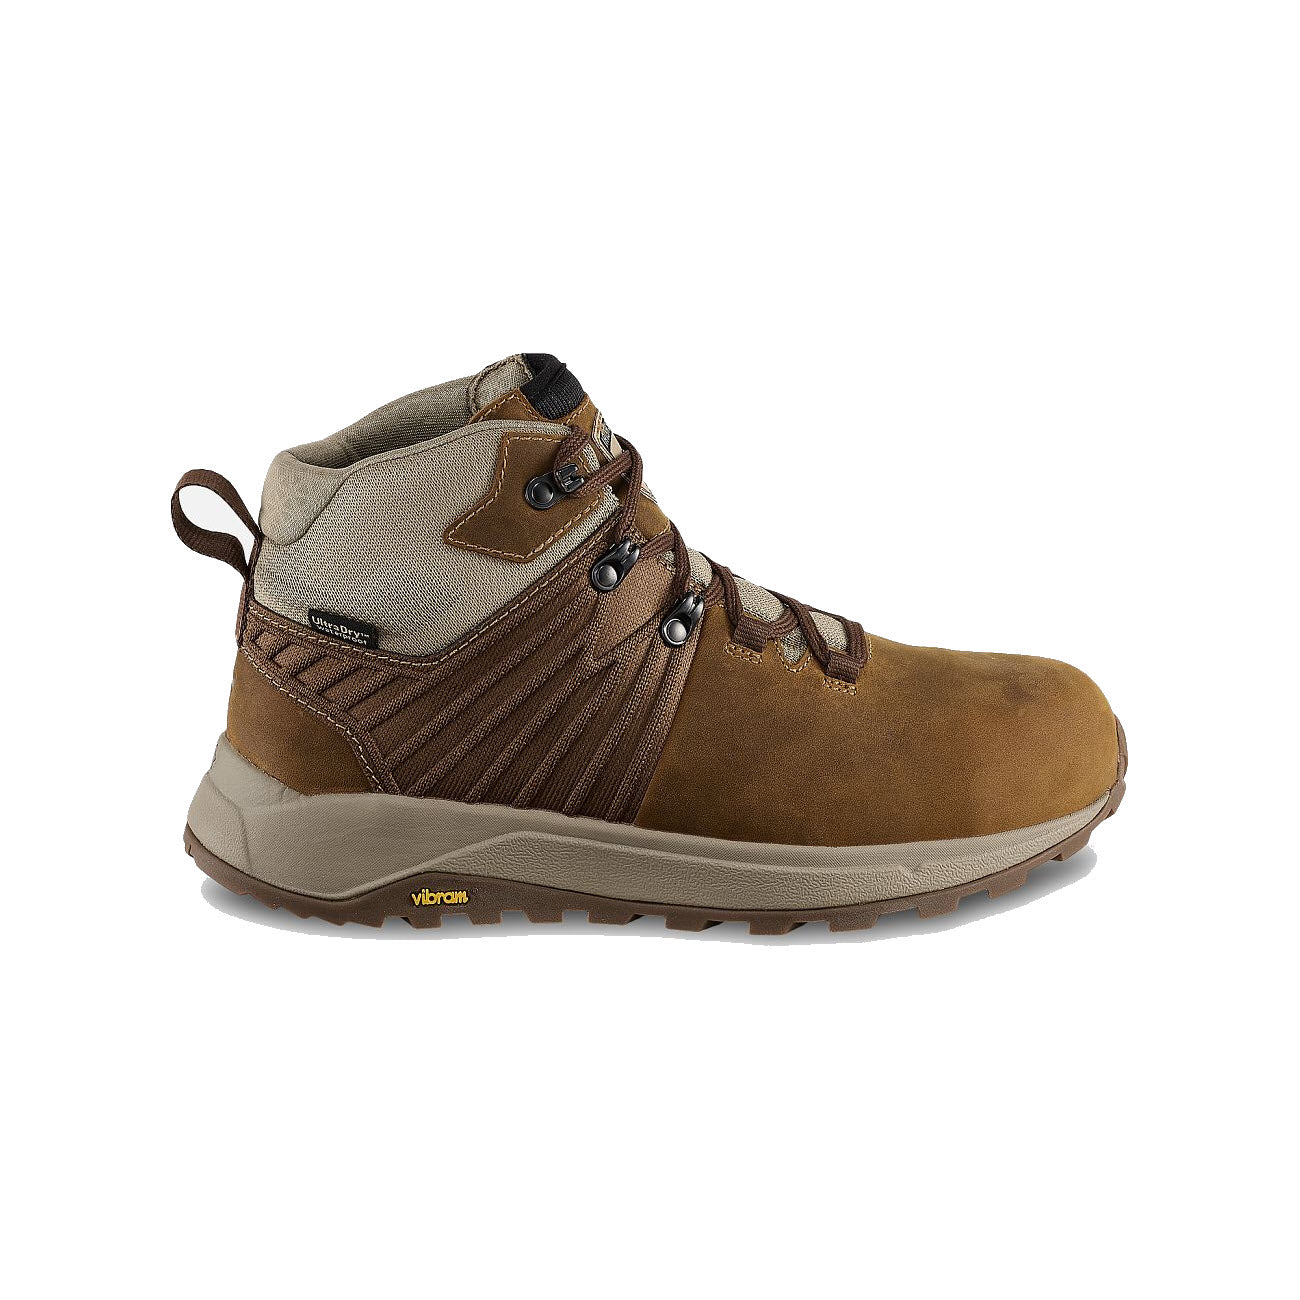 A single Irish Setter Cascade hiking boot in brown and beige with a Vibram® Bayu sole, side view on a white background.